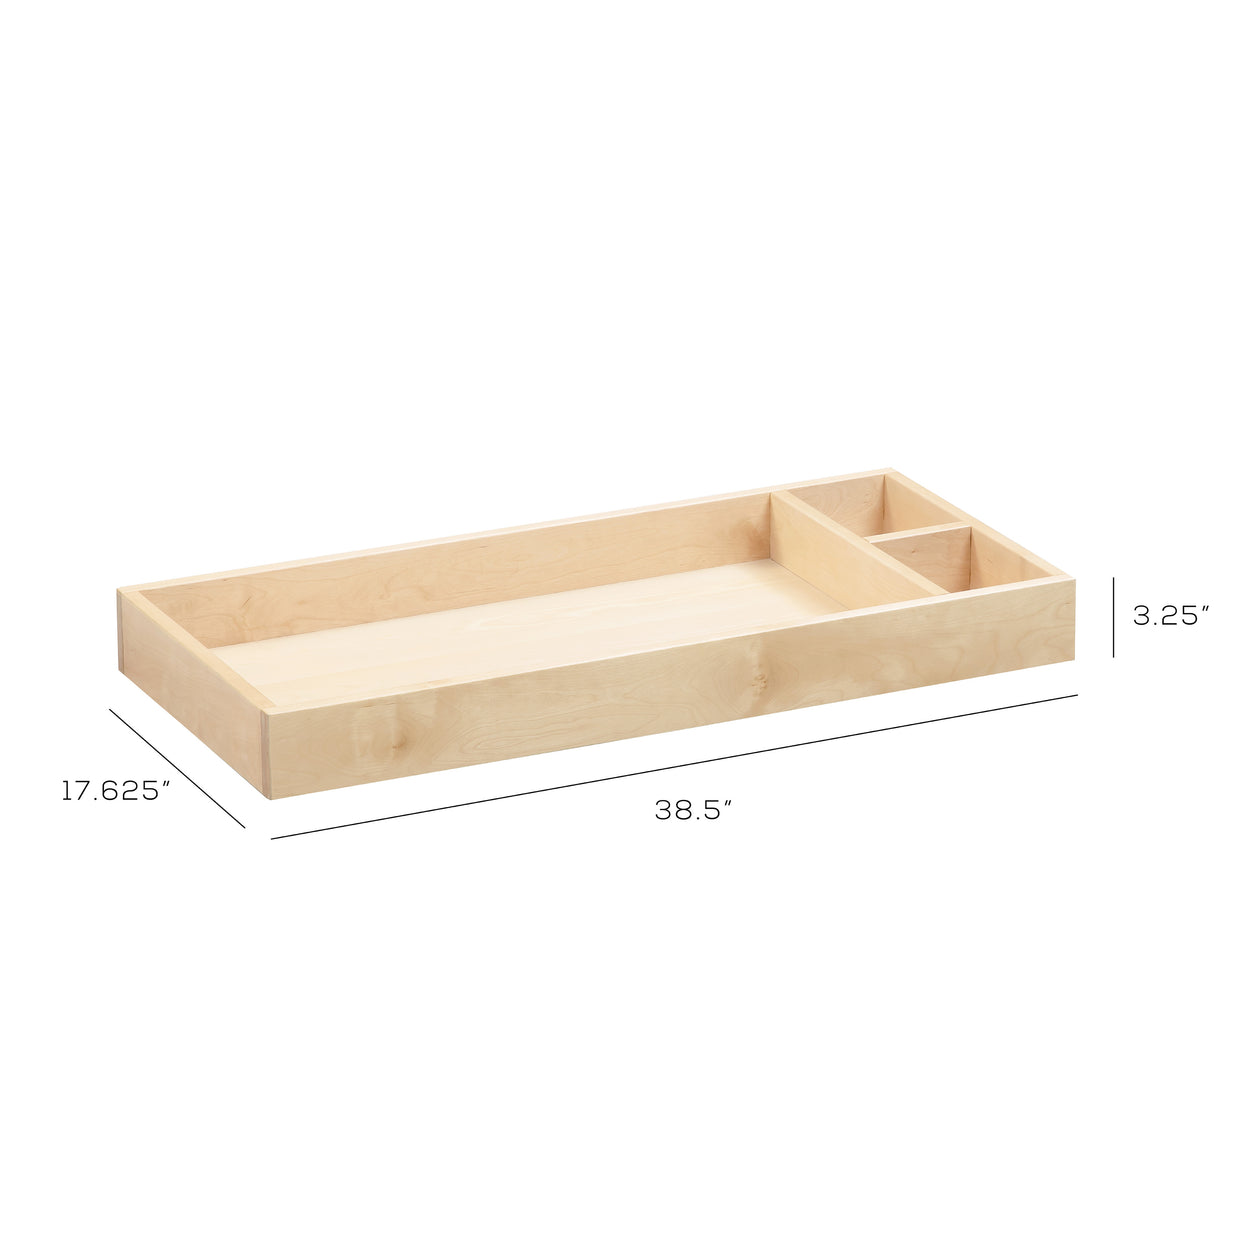 UB0319BR,Removable Changer Tray for Nifty in Natural Birch